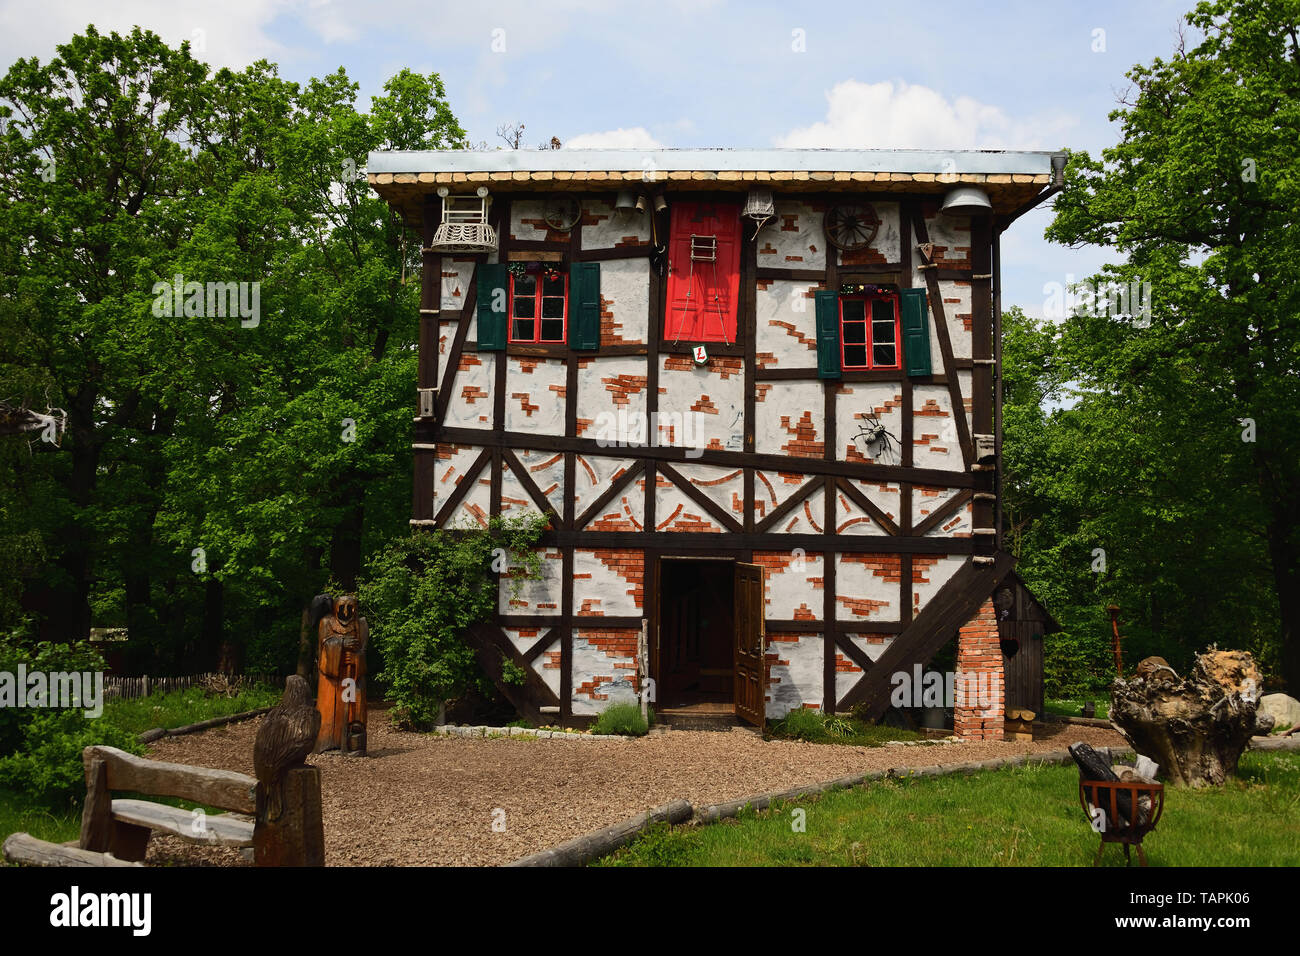 THALE, SAXONY-ANHALT, GERMANY - MAY 24, 2019: Witch's cottage upside down at the Witches' Dance Floor above Thale in the Harz mountains. Family fun. Stock Photo